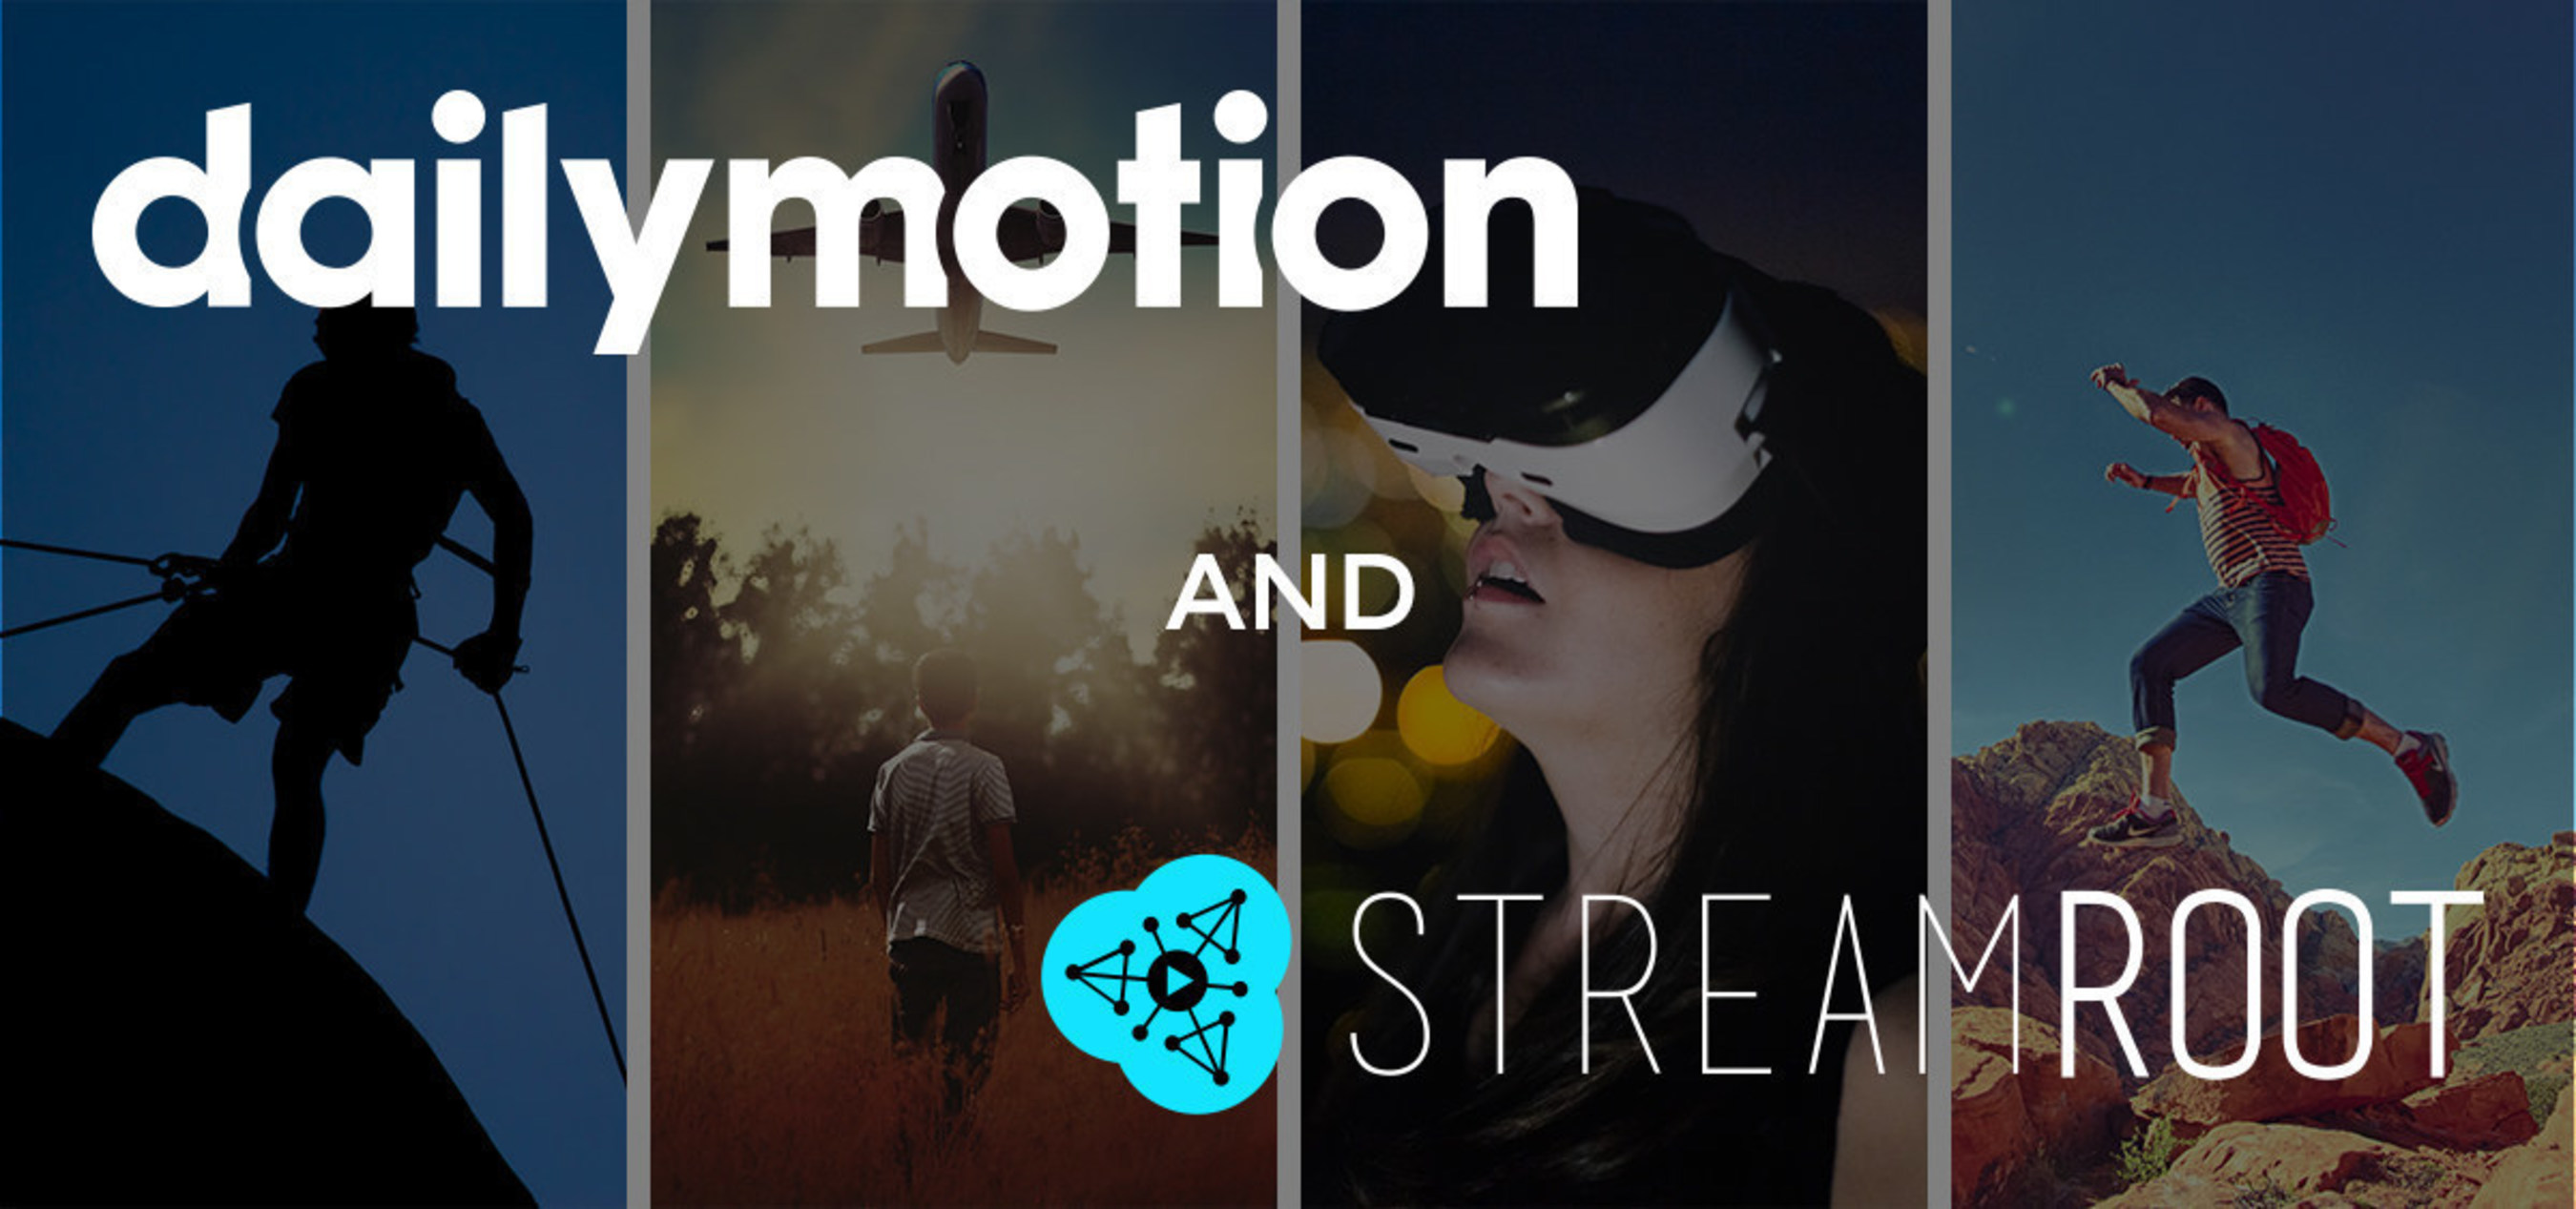 Dailymotion selects Streamroot to control cost and QoS for large scale OTT video delivery